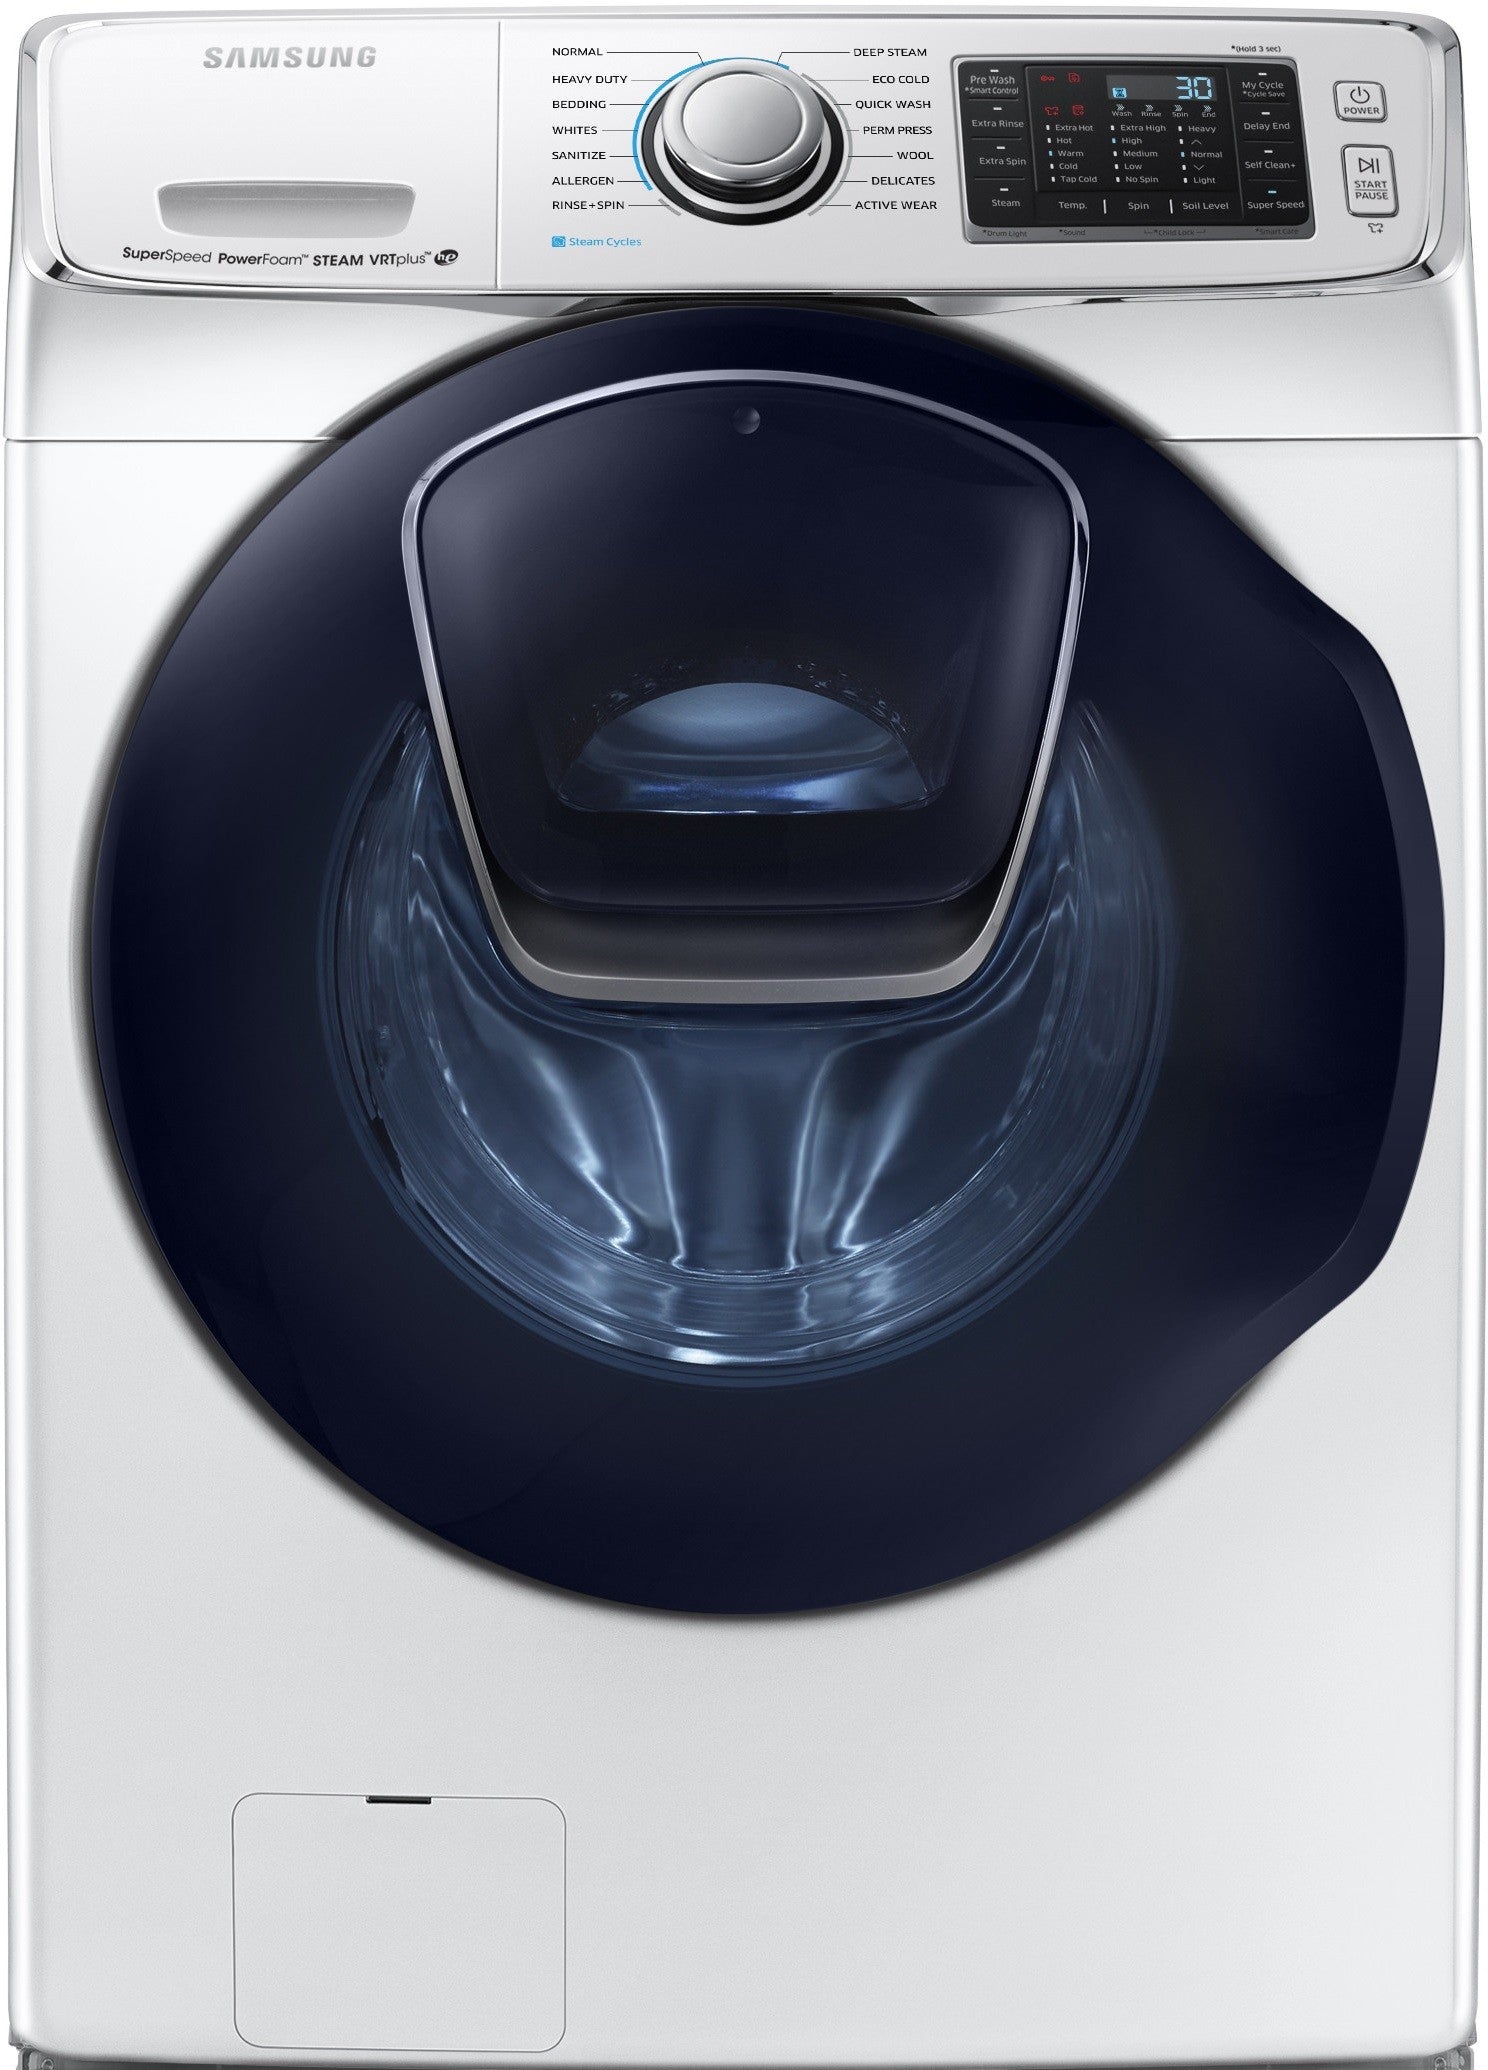 Samsung WF50K7500AW/A2 5.0 Cu. Ft. High-efficiency Front-loading Washer - Samsung Parts USA